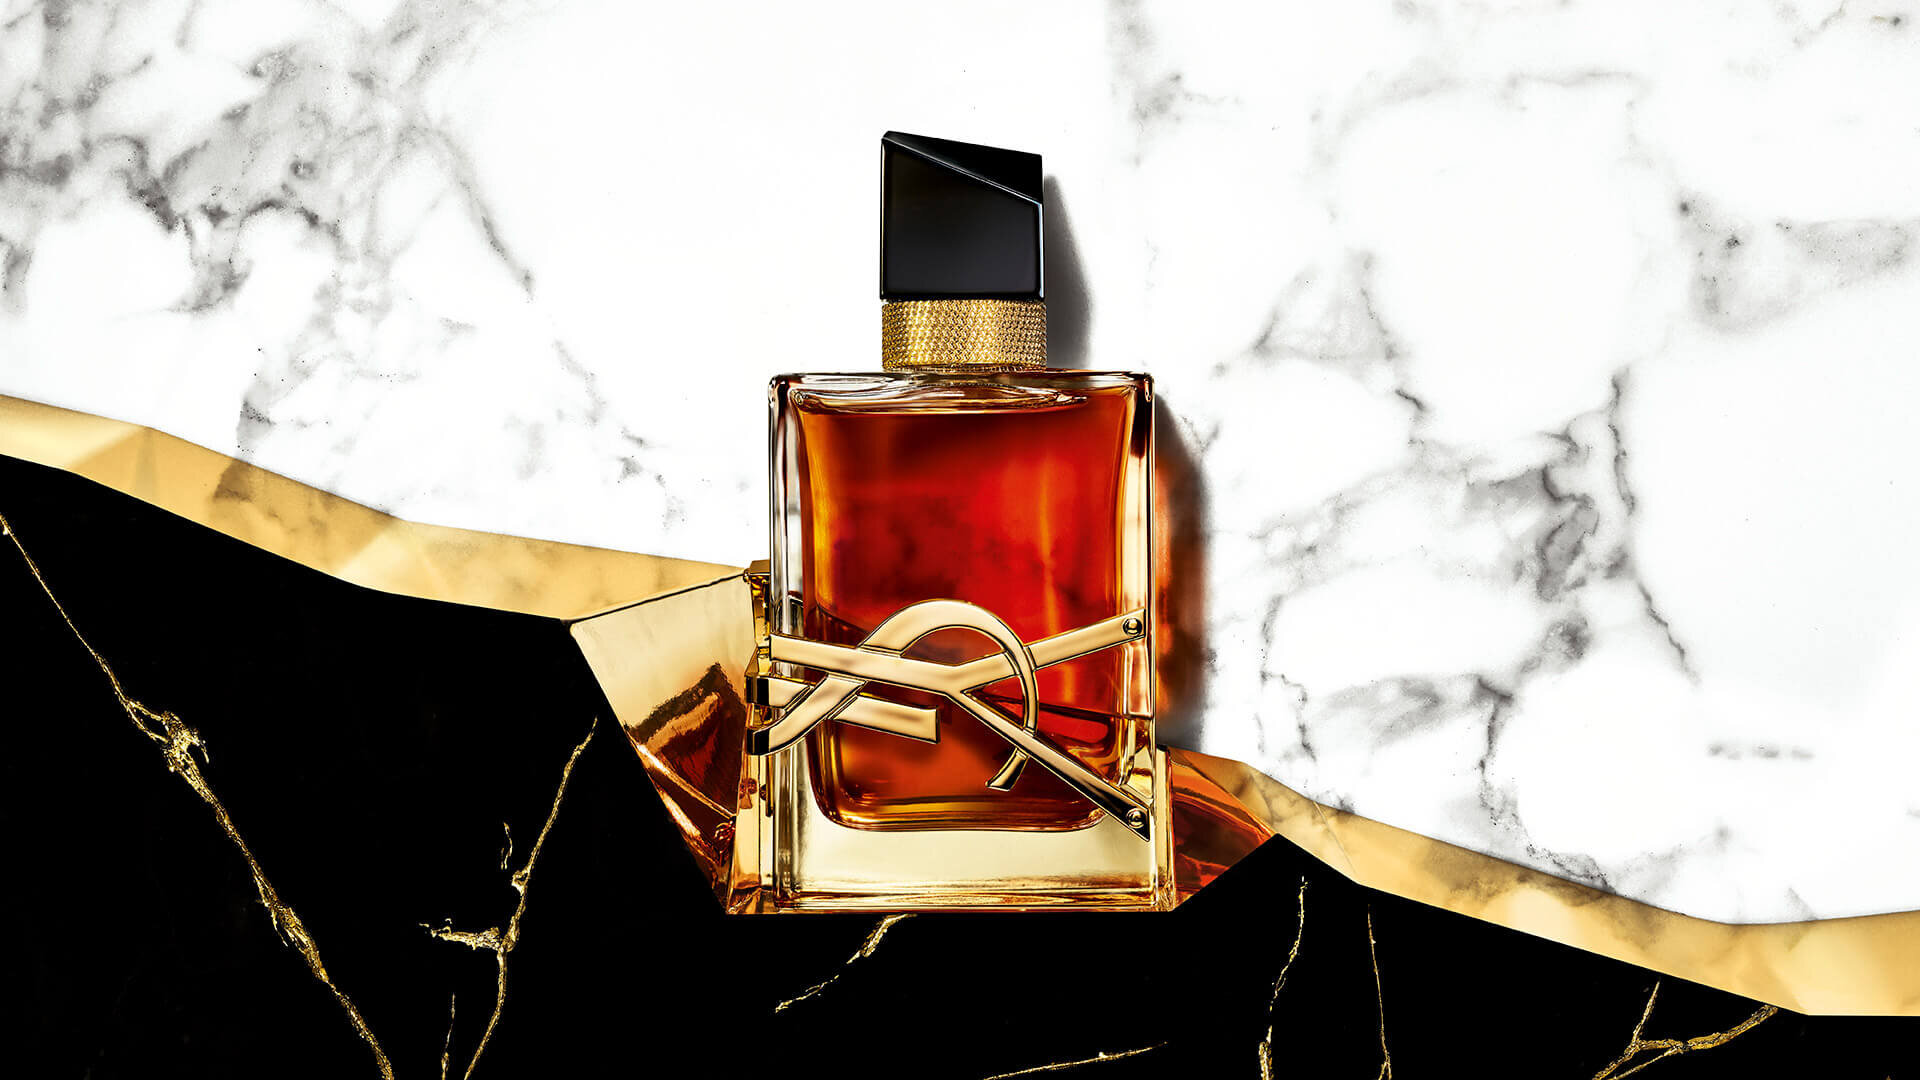 Luxury Fragrances by YSL: Perfume & Cologne - YSL Beauty